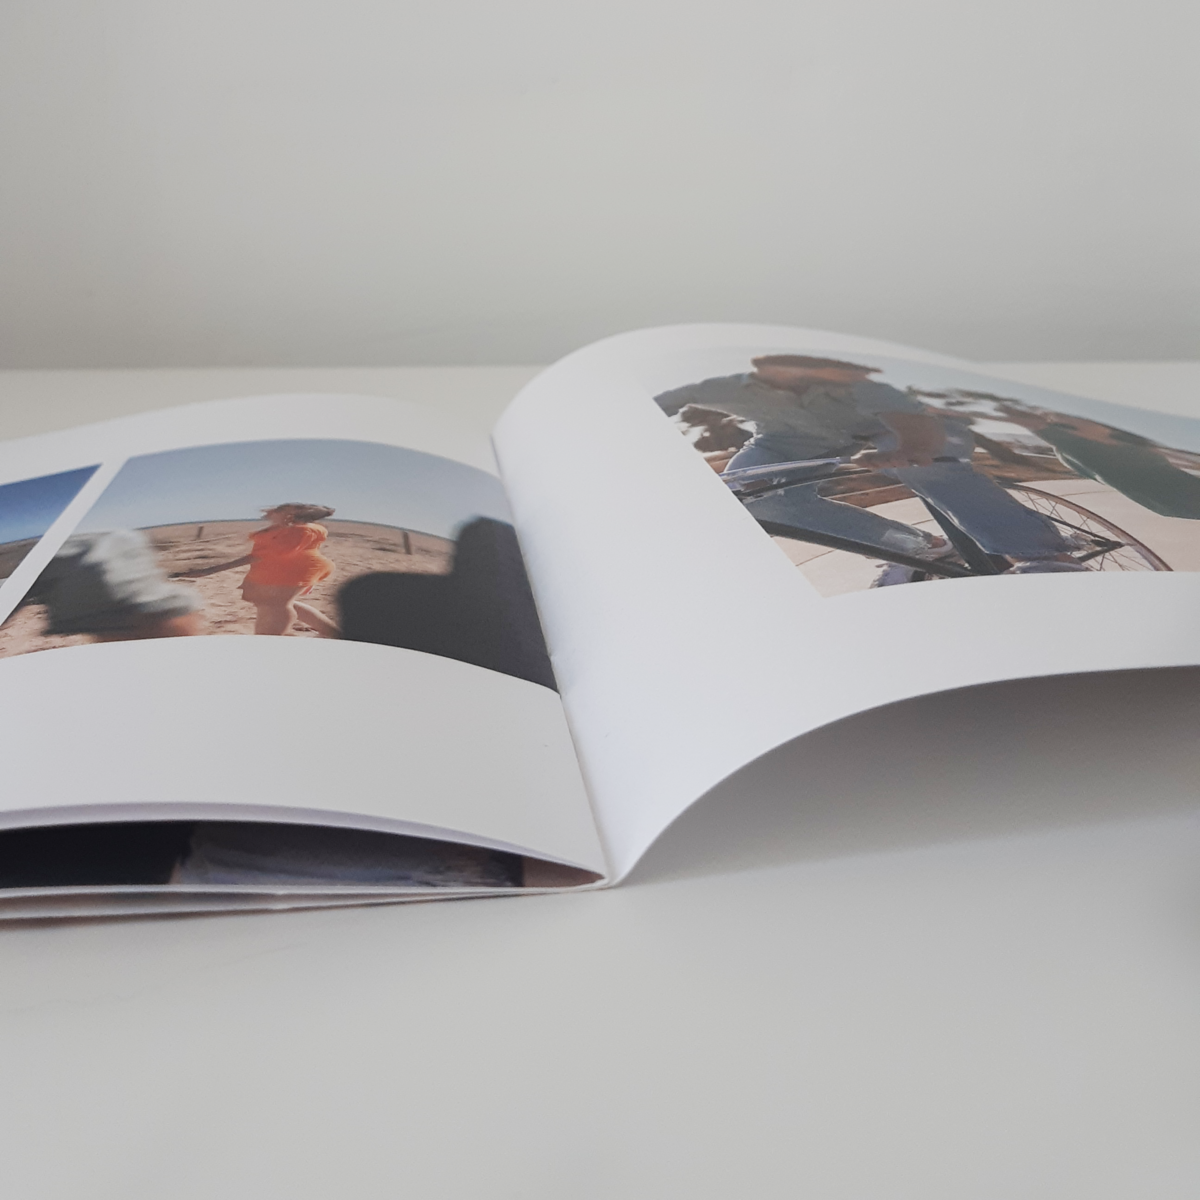 The custom photo booklets from Lettr are printed in square format  - Happiedays